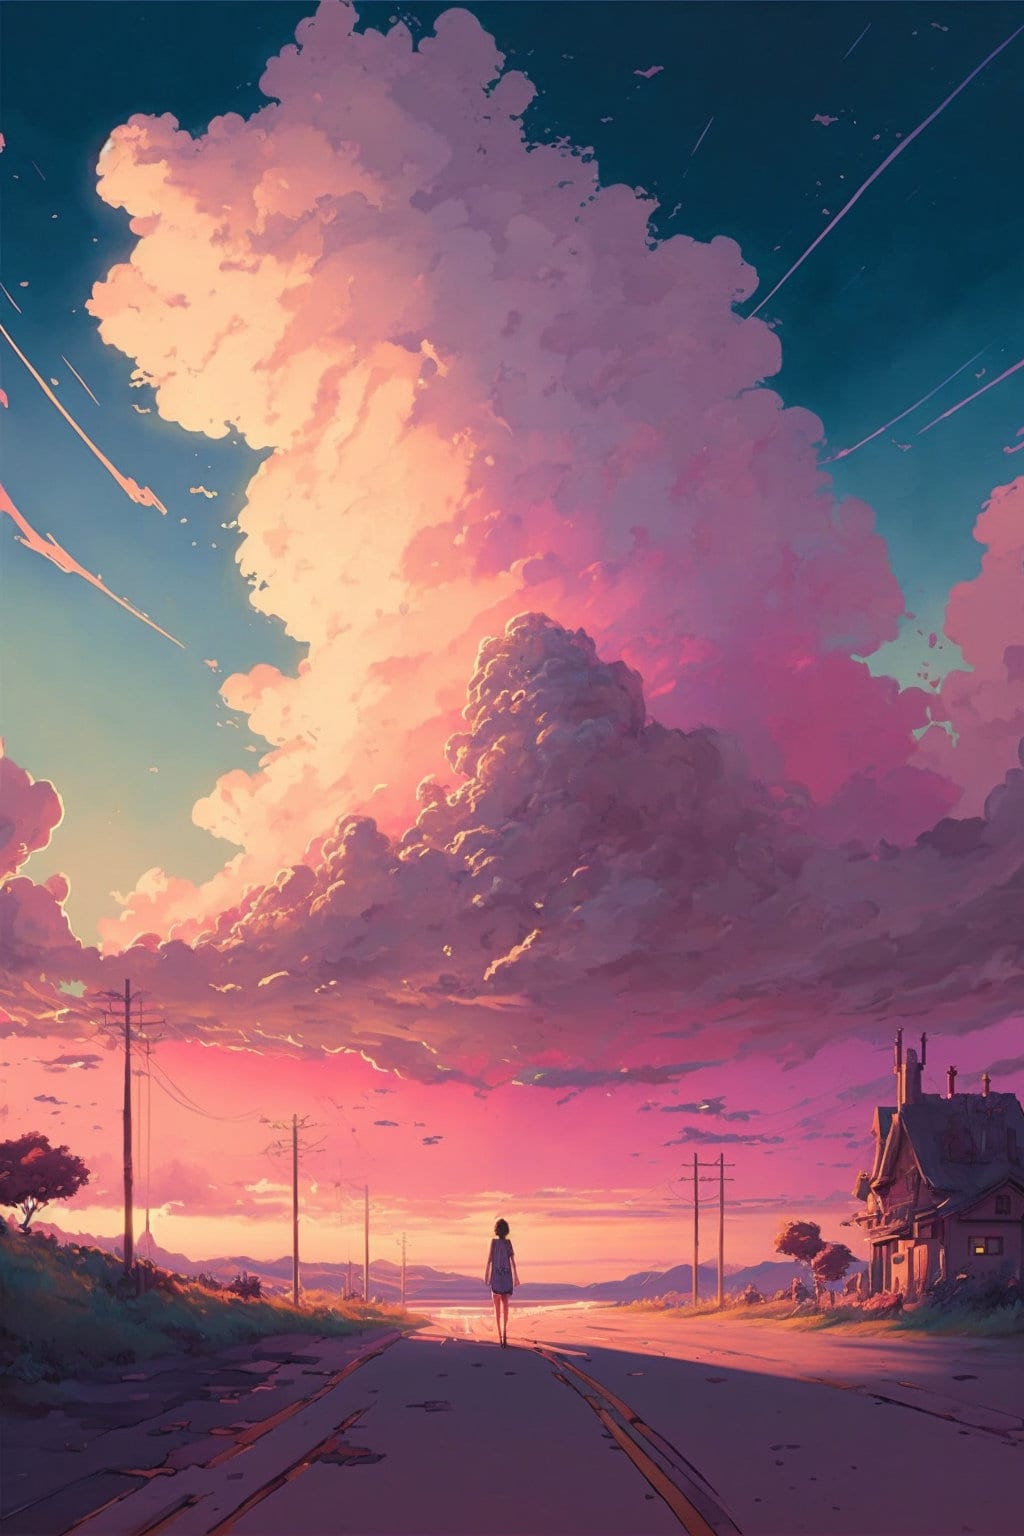 A person standing on an empty road under a cloudy sky - Anime sunset